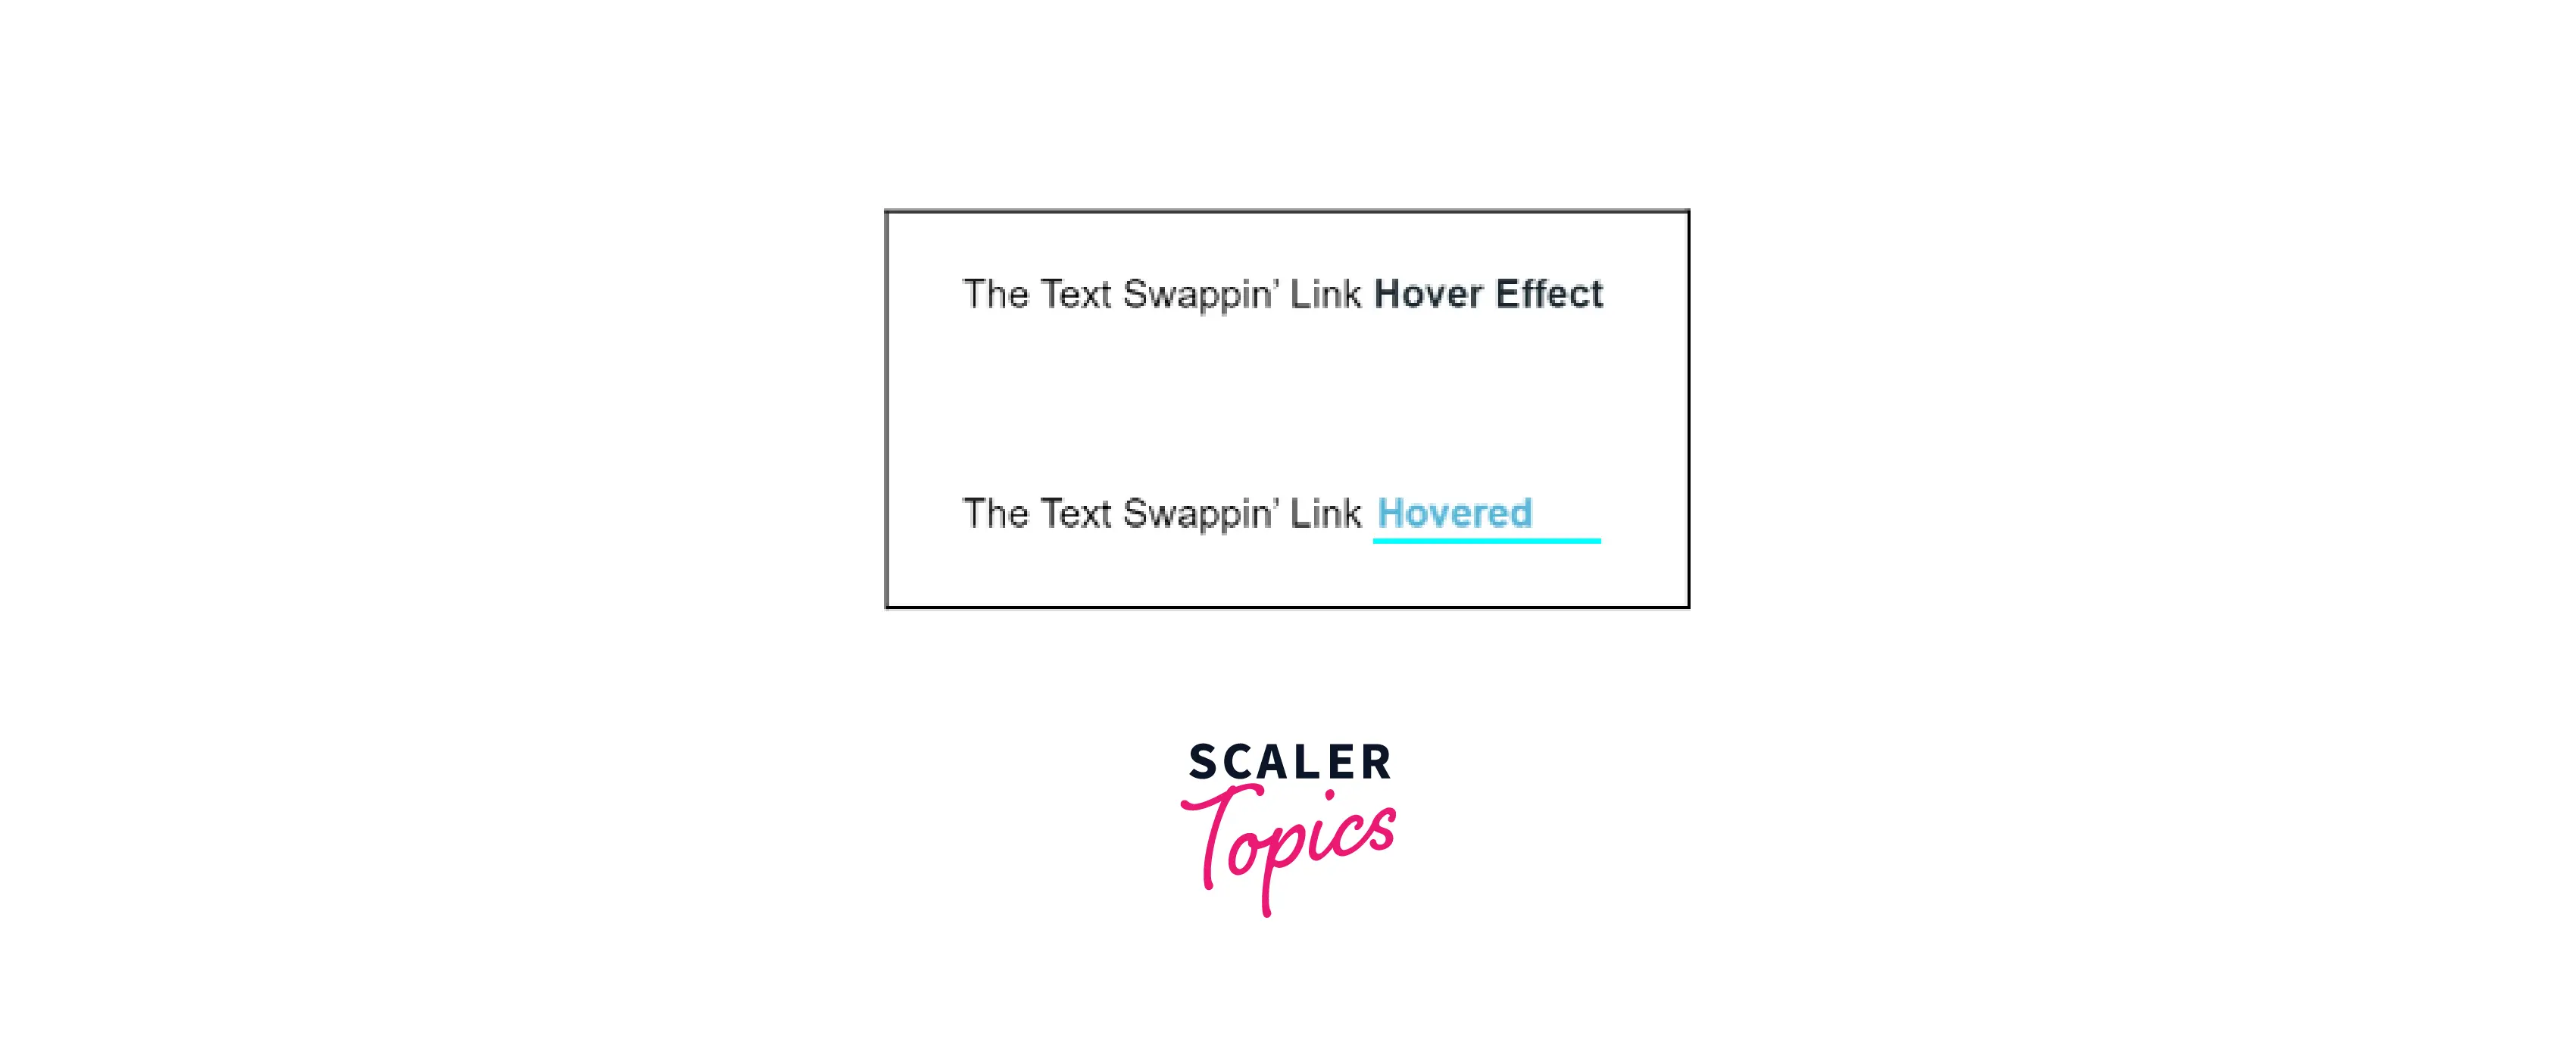 Text Swappin Link Hover Effect